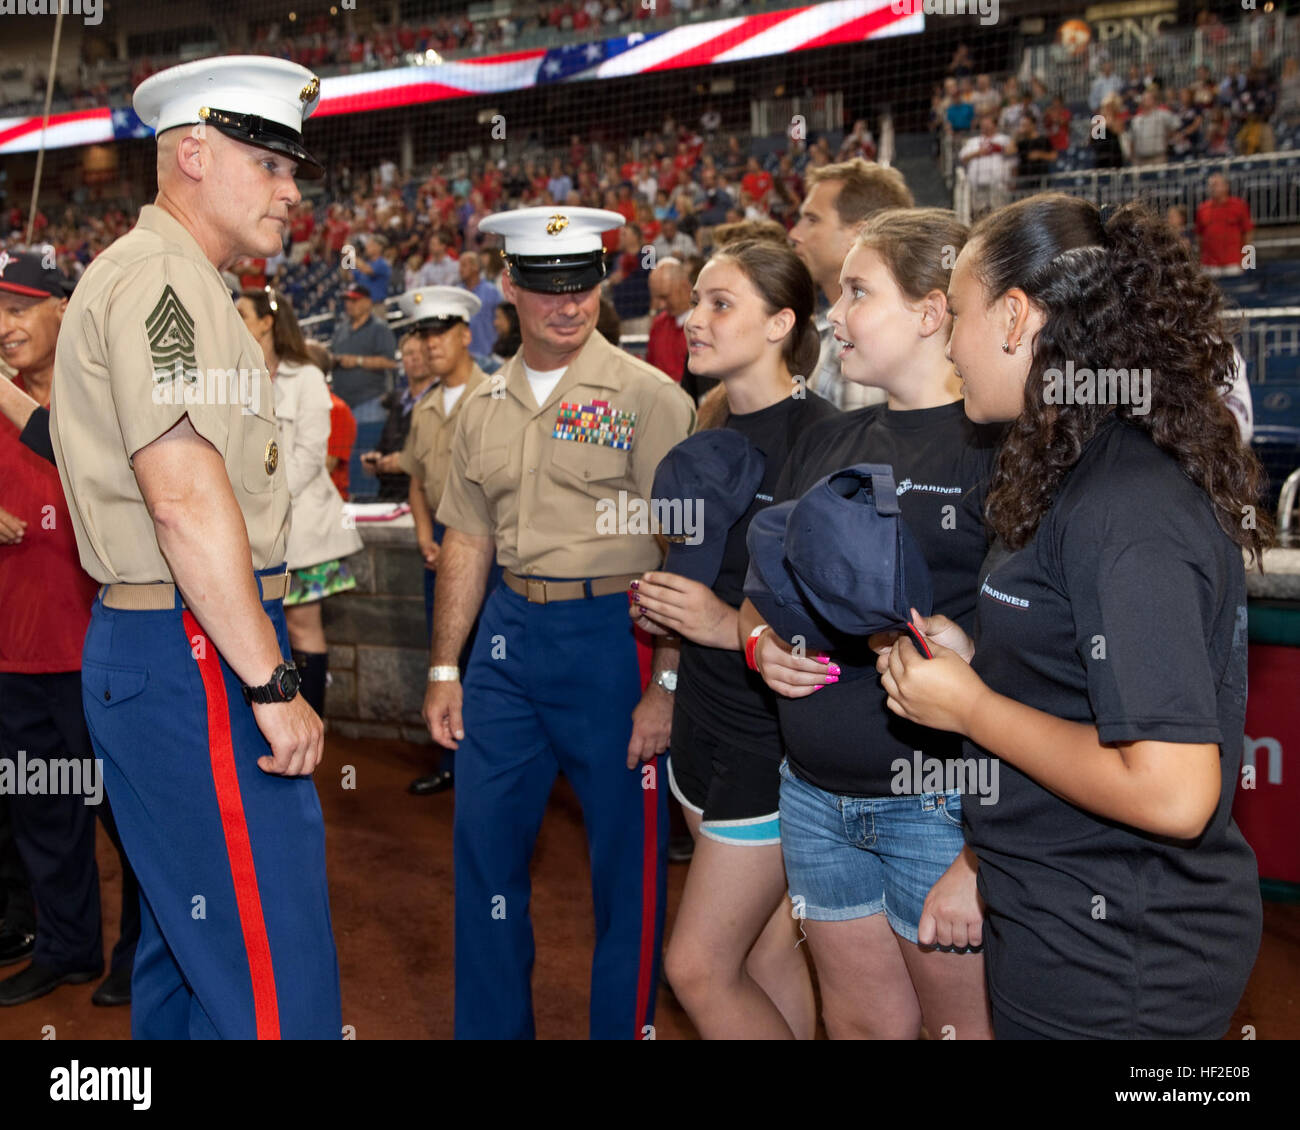 The 17th Sergeant Major of the Marine Corps, Sgt. Maj. Micheal P. Barrett, left, attends the Washington Nationals' Marines Day baseball game in Washington, D.C., Aug. 20, 2014. (U.S. Marine Corps photo by Lance Cpl. Samantha K. Draughon/Released) Sergeant Major of the Marine Corps Attends Baseball Game 140820-M-EL431-072 Stock Photo